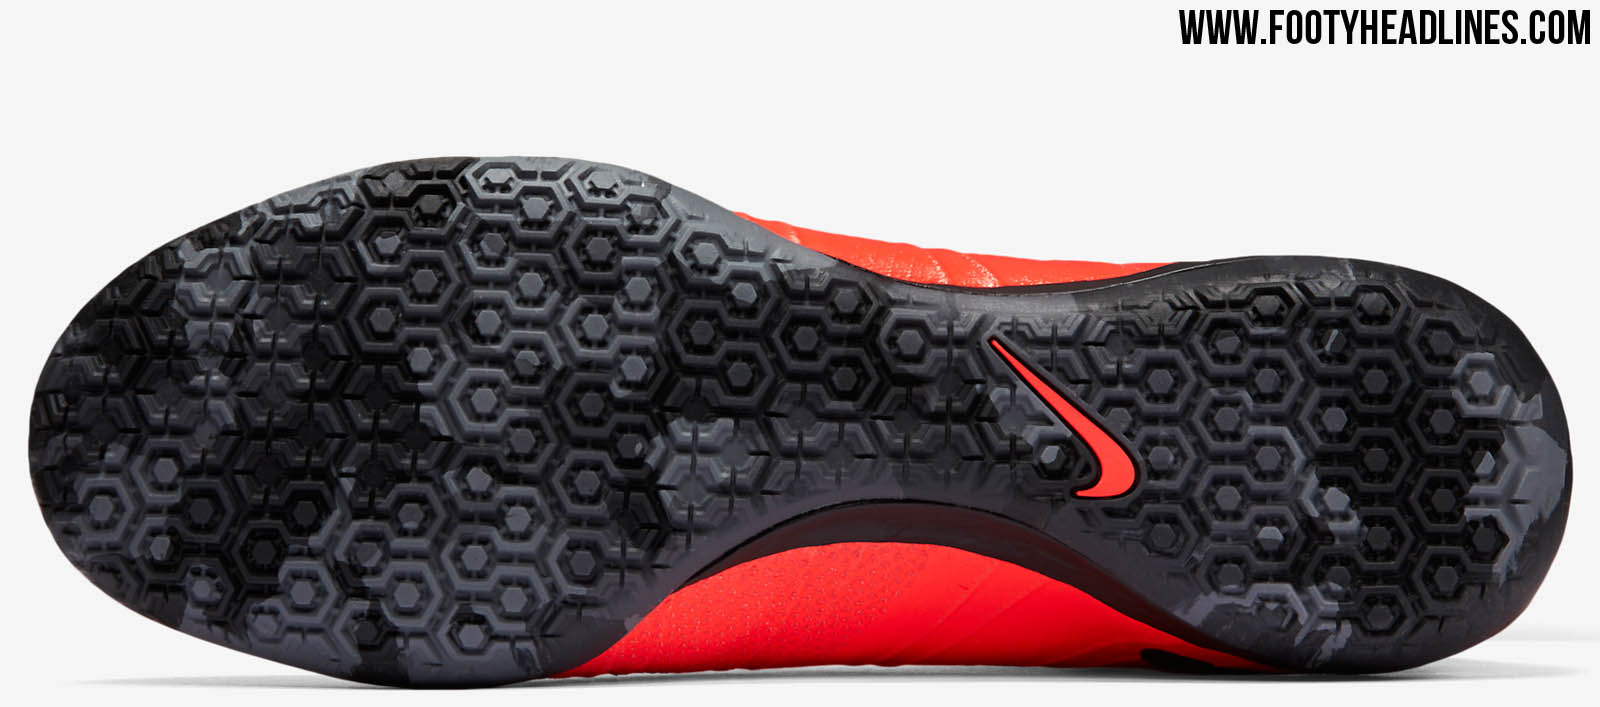 Red Nike Mercurial X Proximo Boots Revealed - Footy Headlines